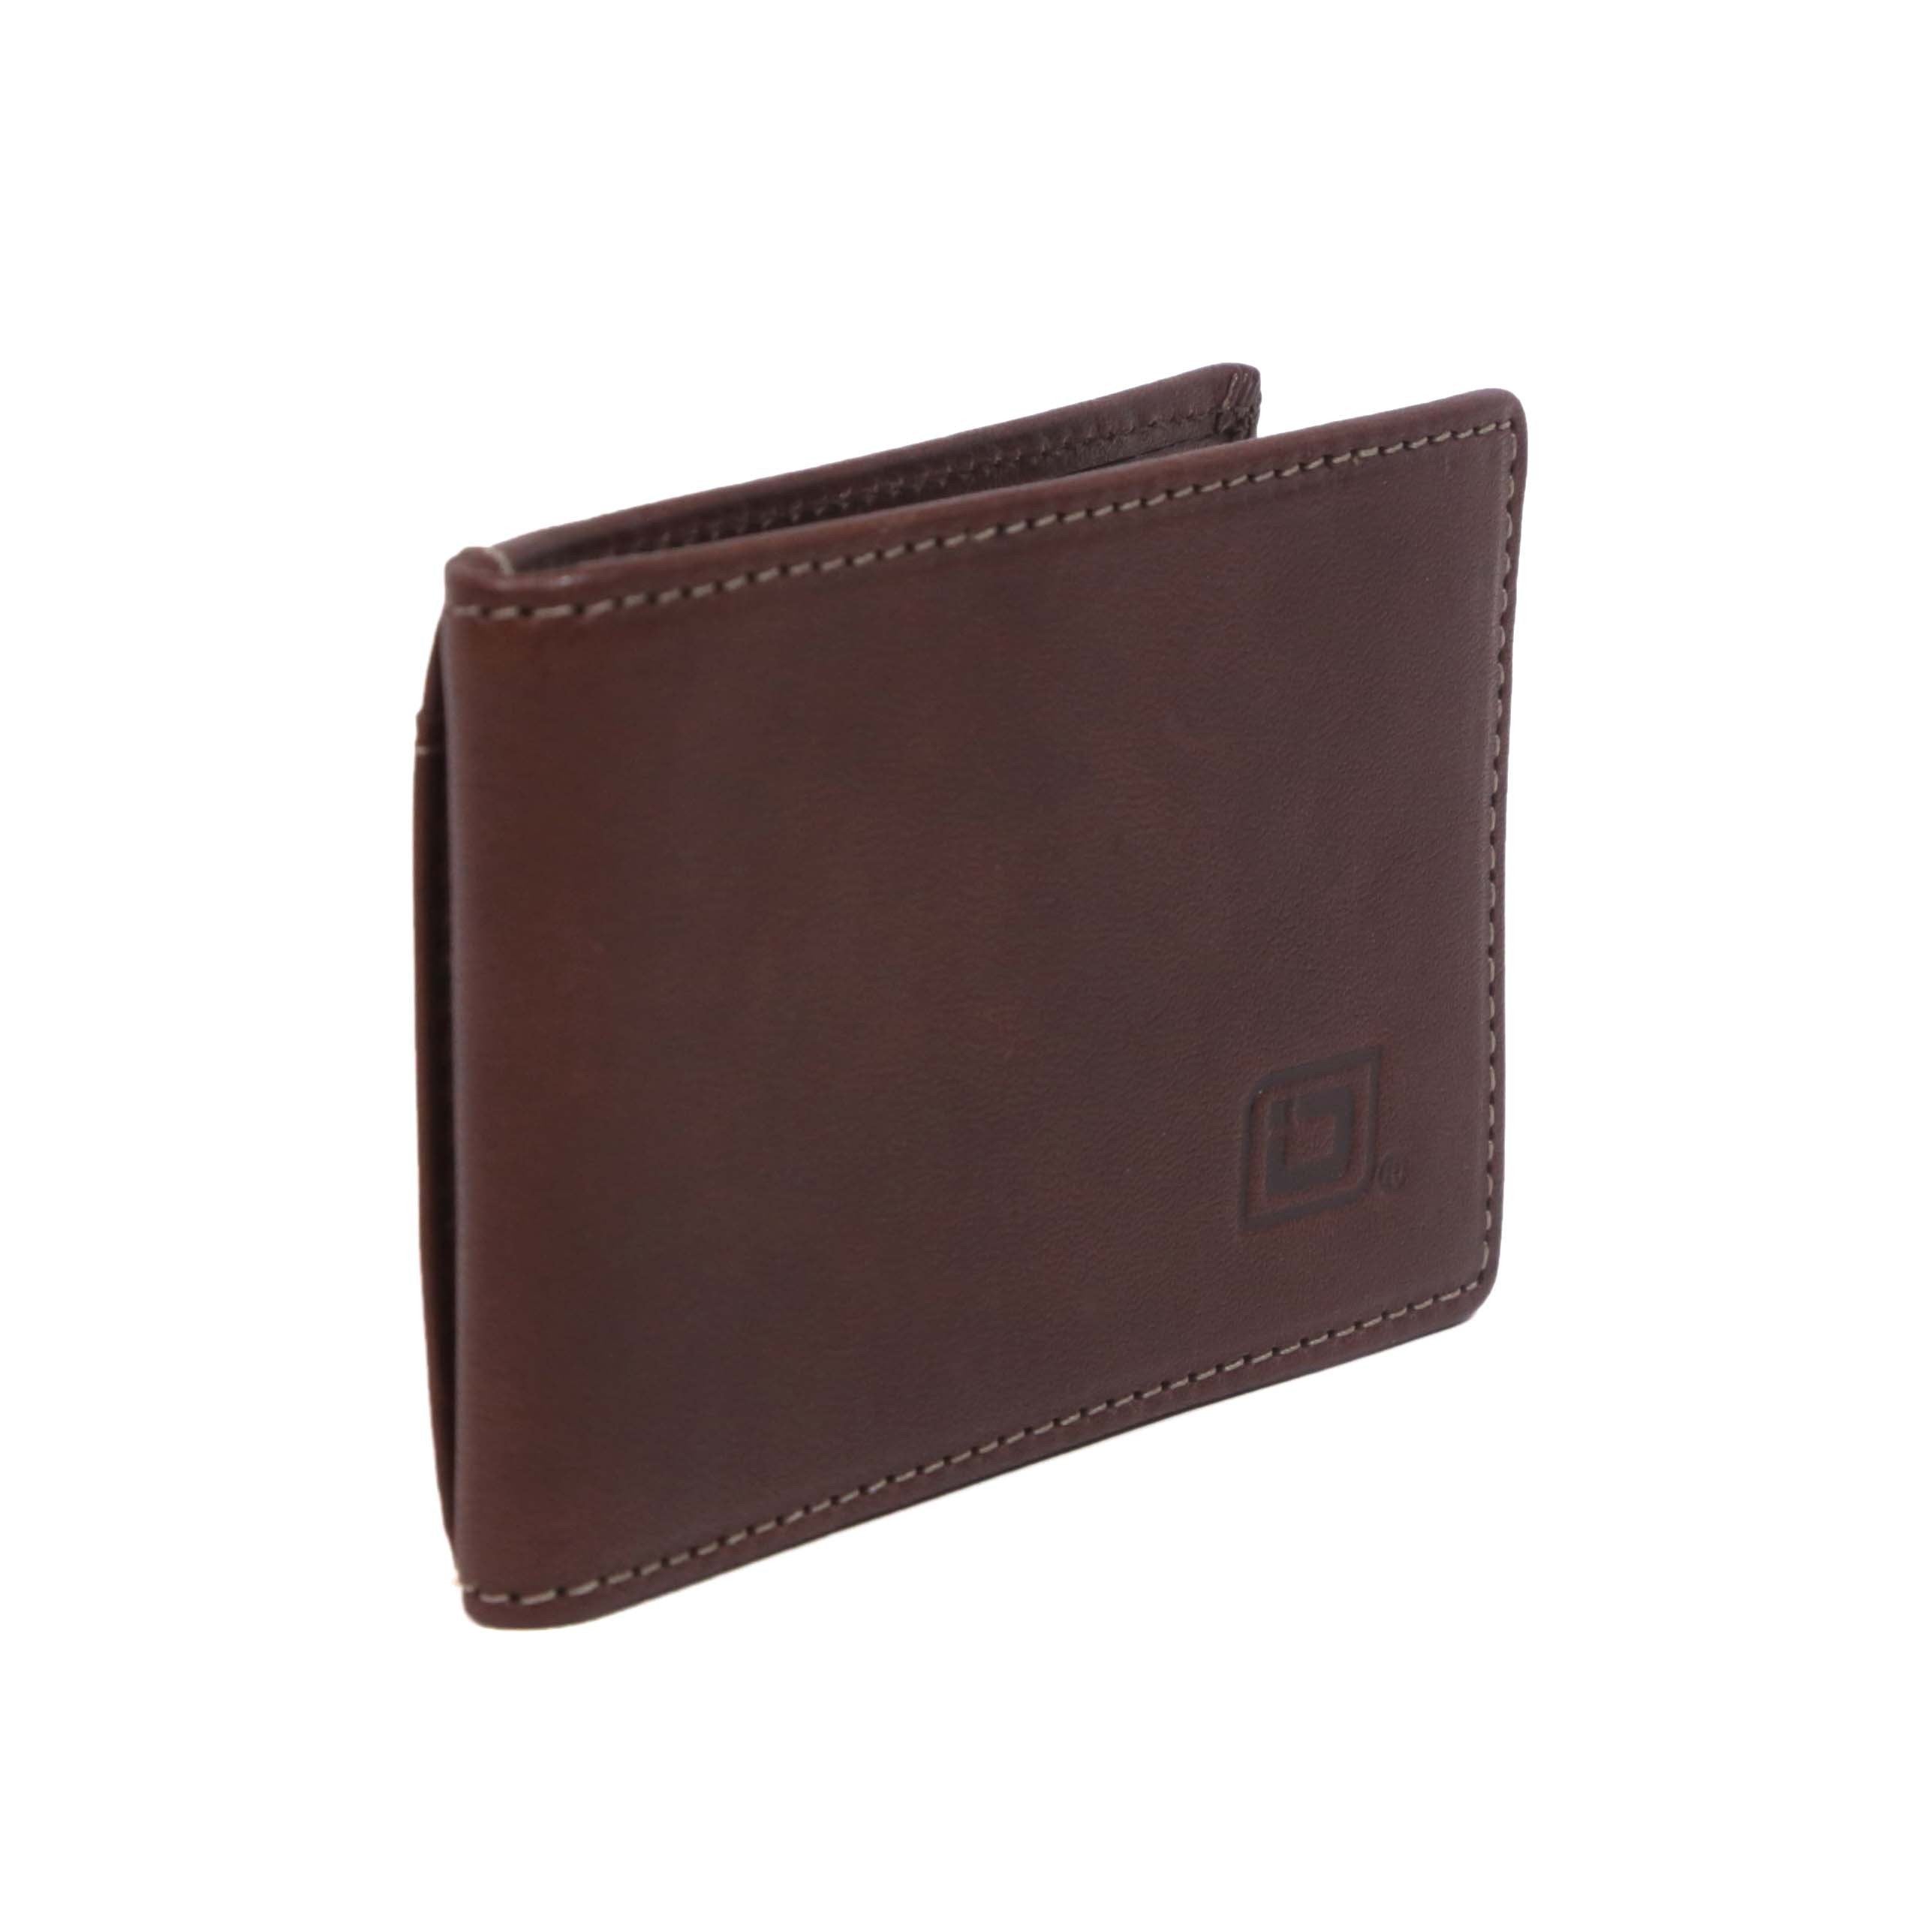 ID Stronghold Italian Leather Front Pocket Bifold RFID Wallet - Leather, Men's, Size: Large, Brown